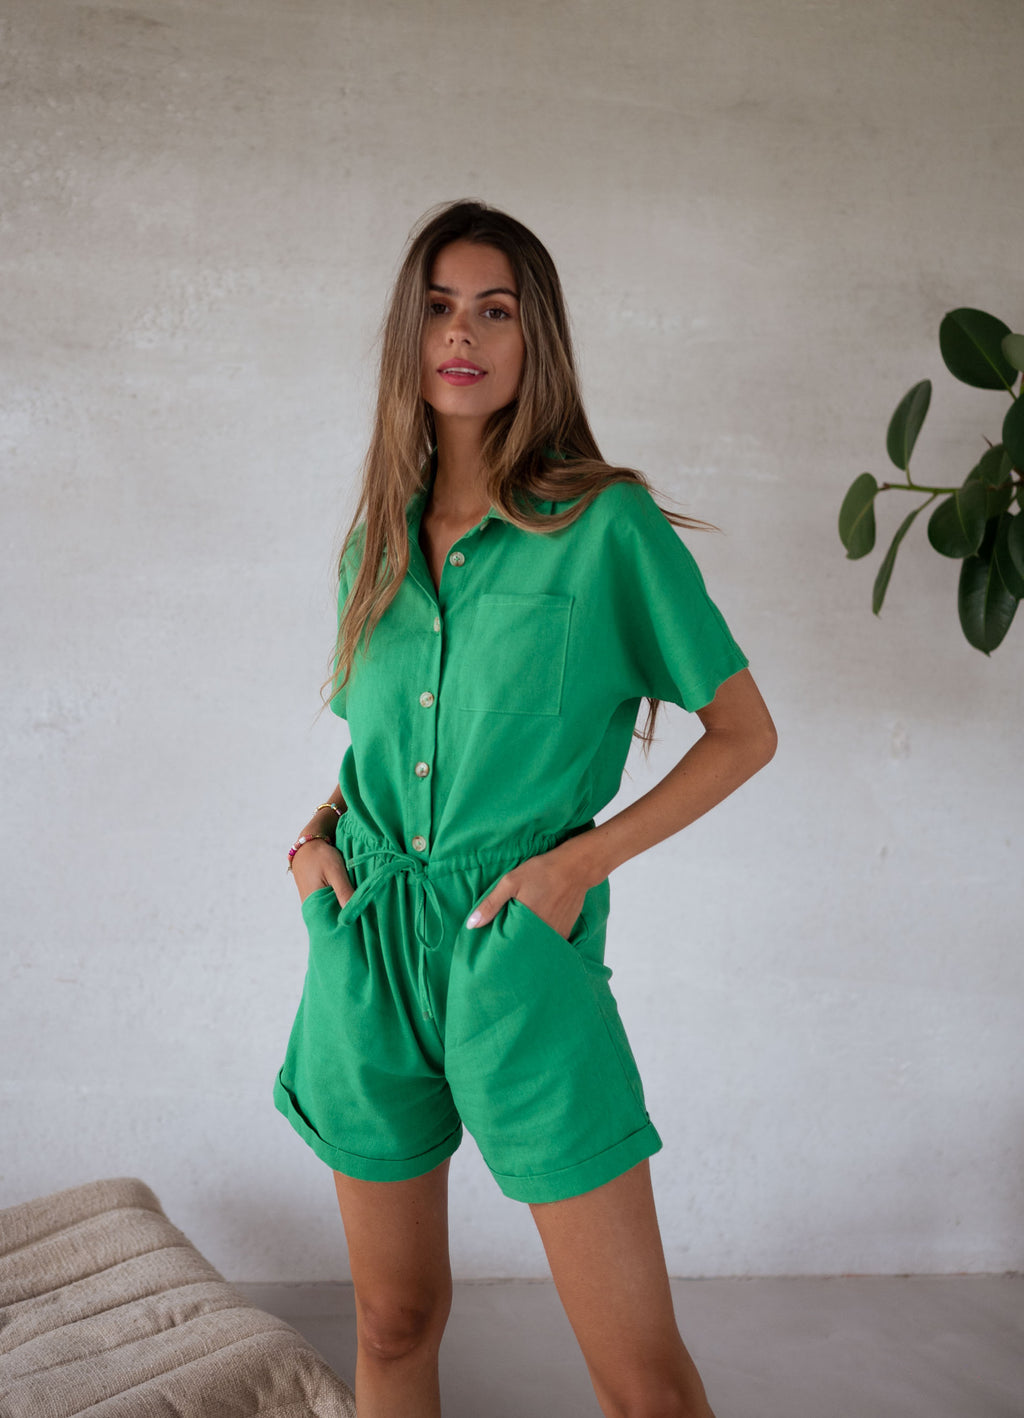 Suit Madeline - green